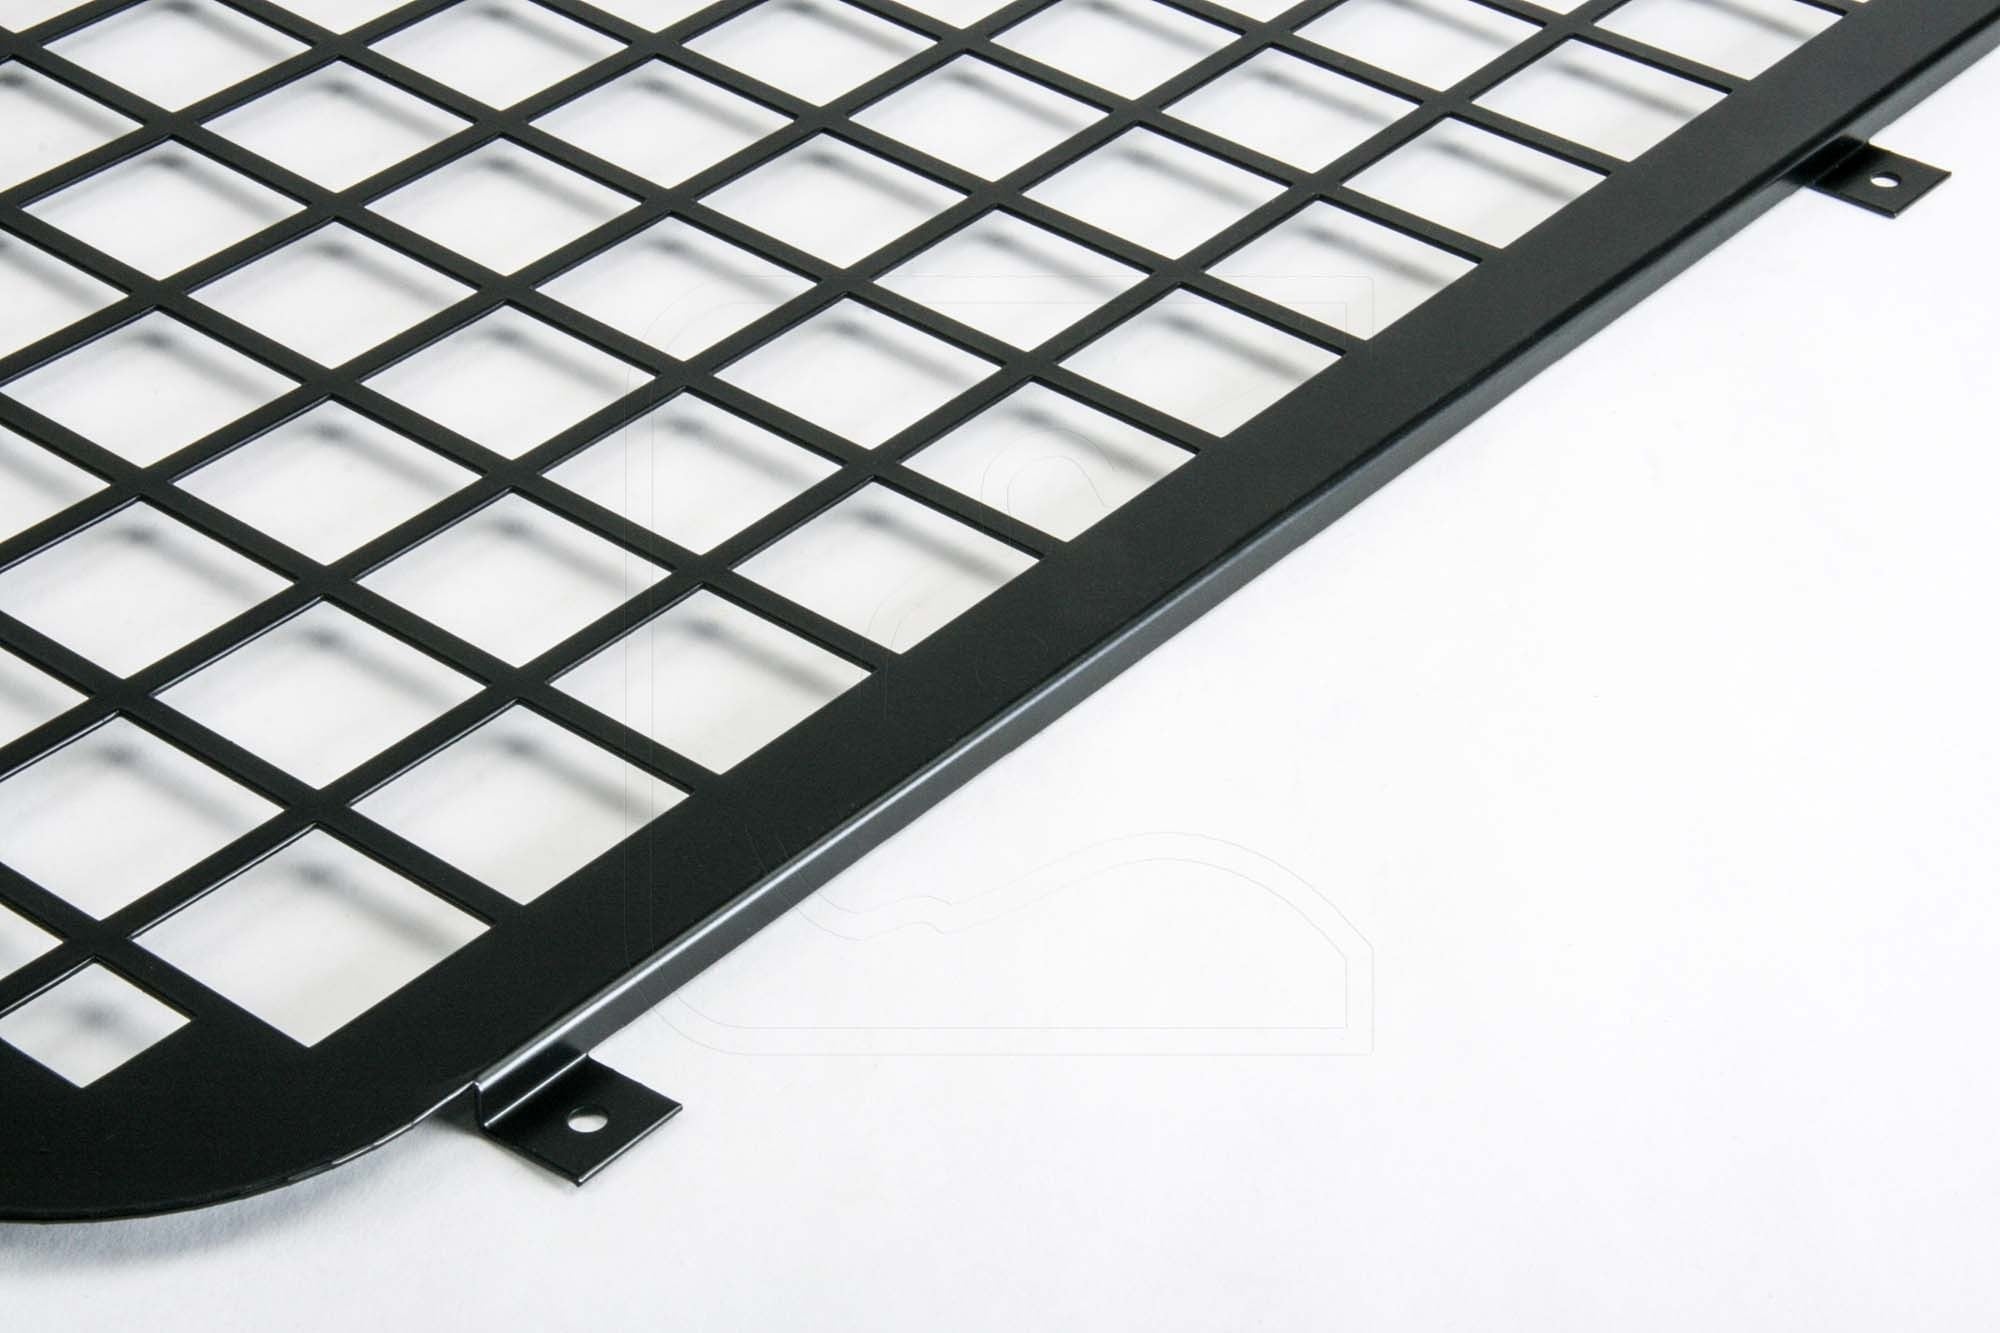 Station Wagon Window Grille - for Land Rover Defender 90/110 (sold individually) [***6-8 WEEK LEAD-TIME***]